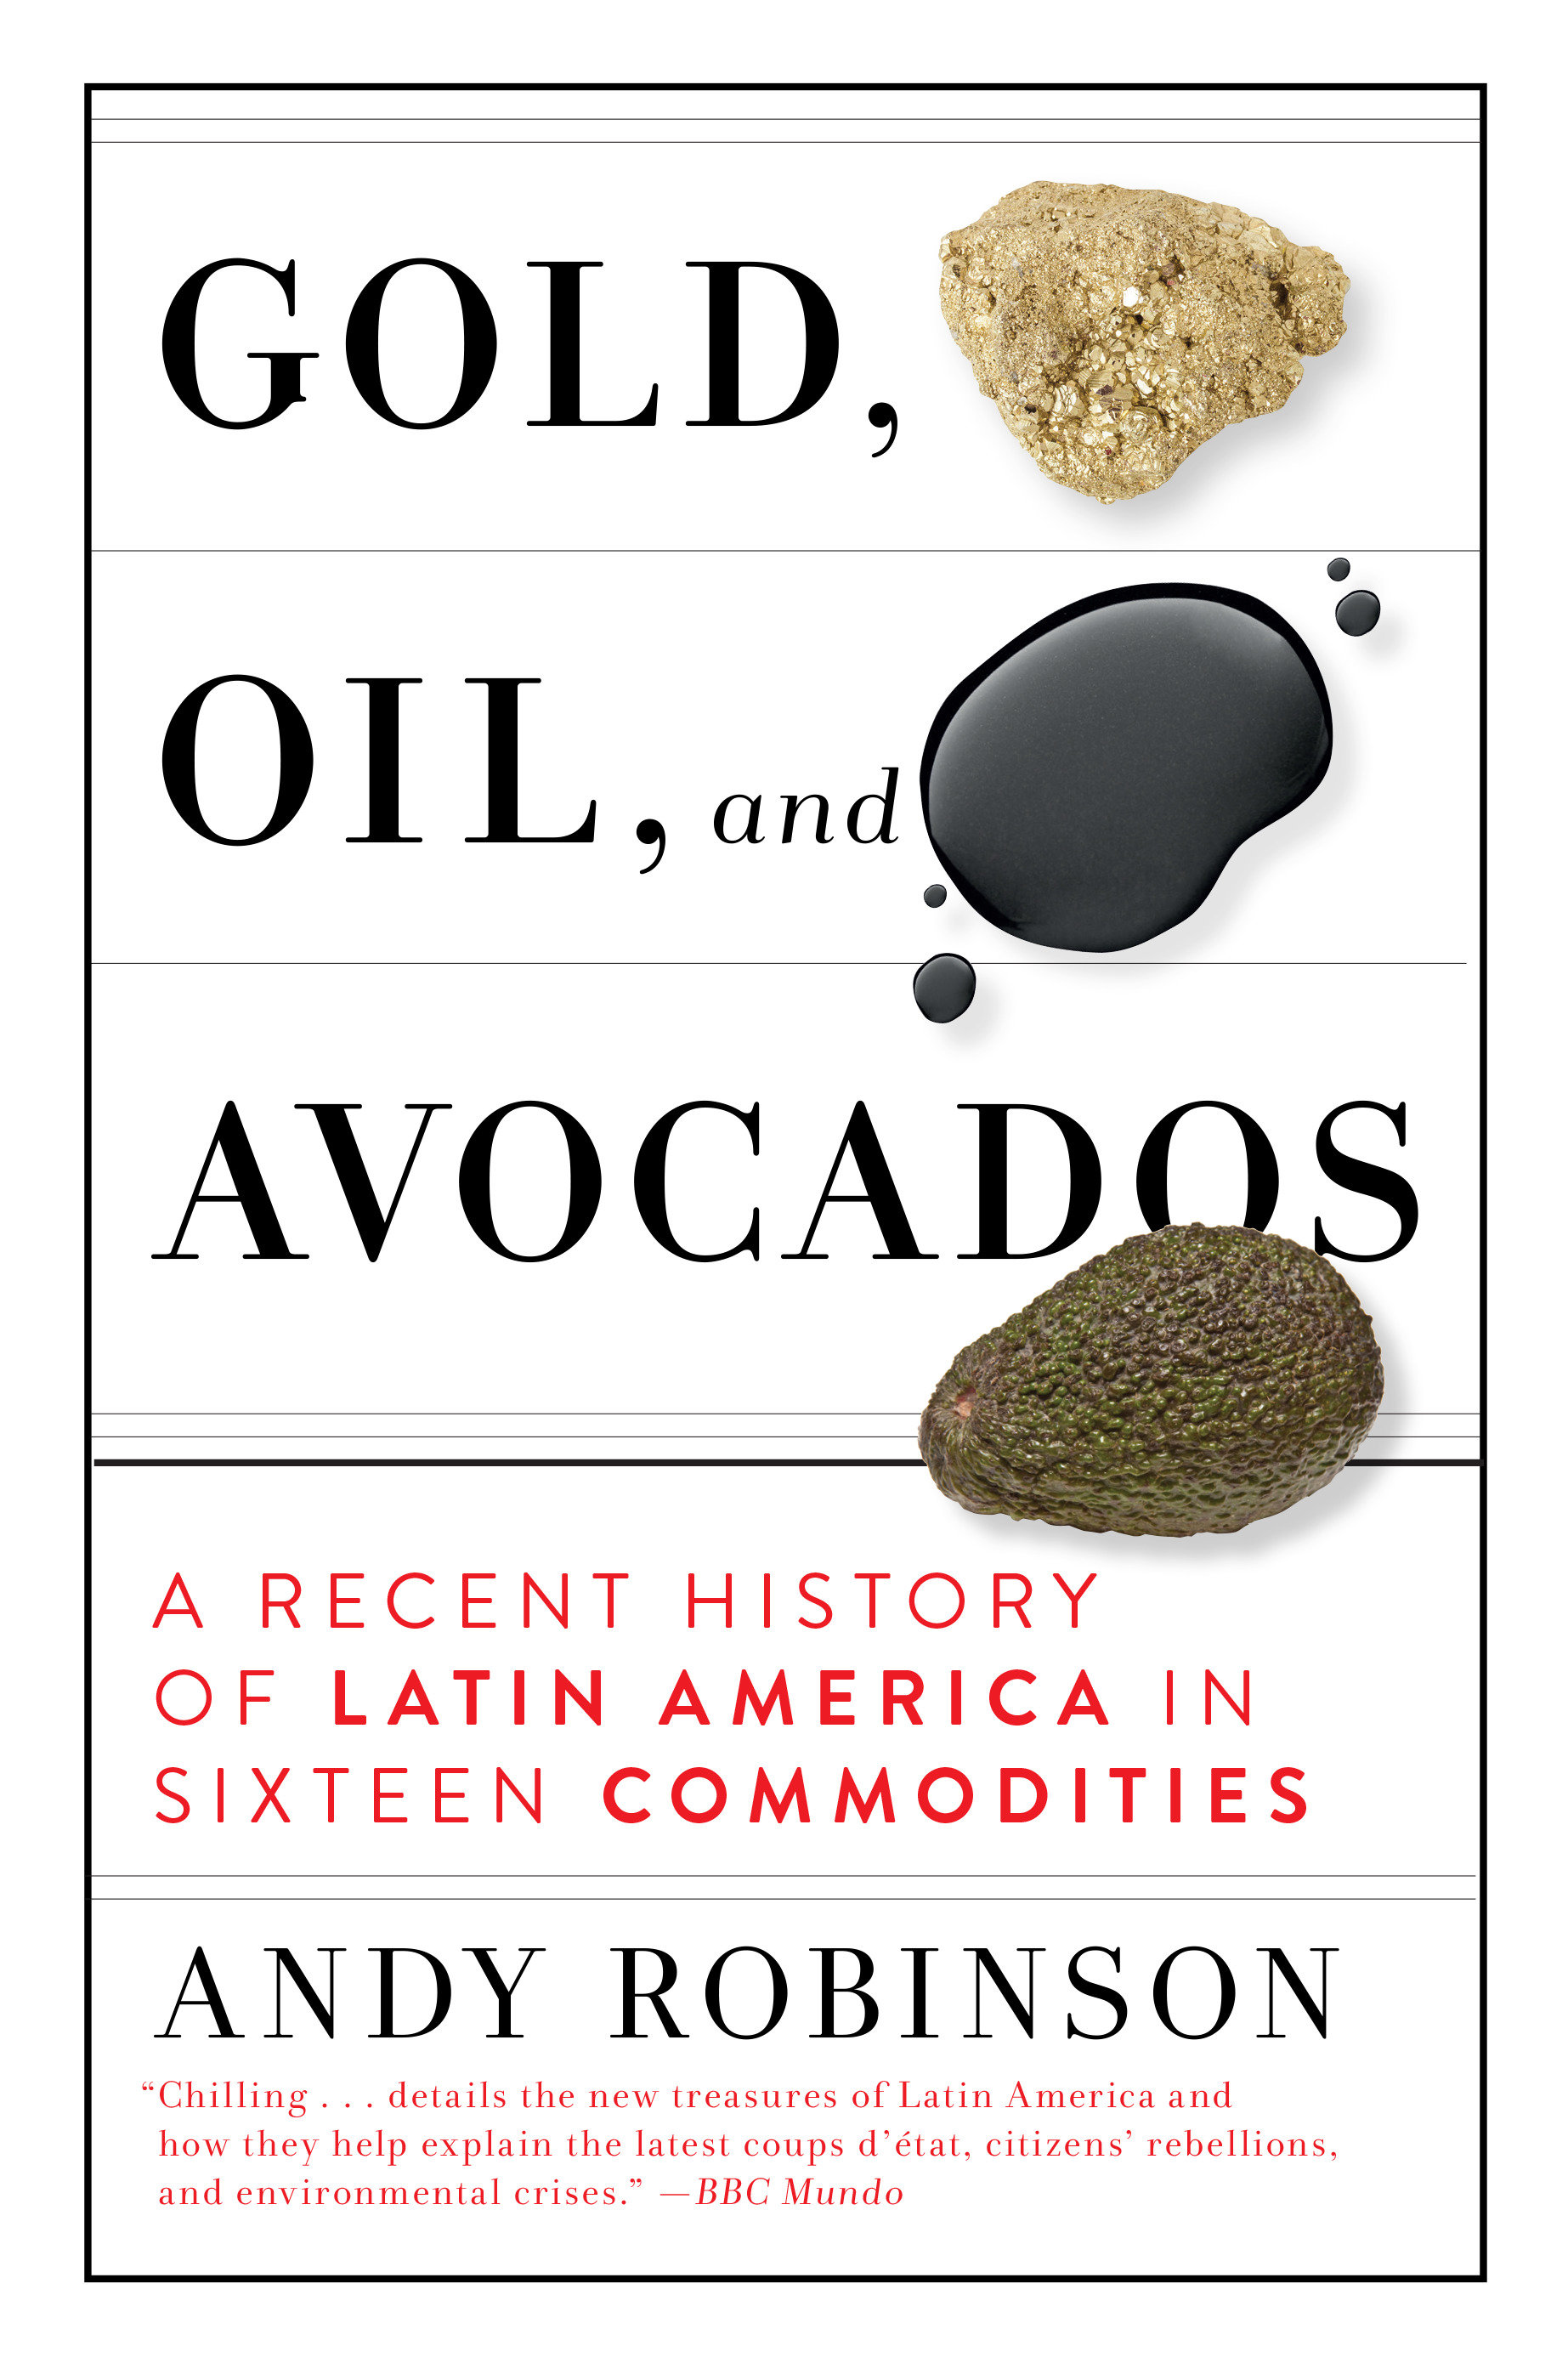 Gold, Oil And Avocados (Hardcover Book)